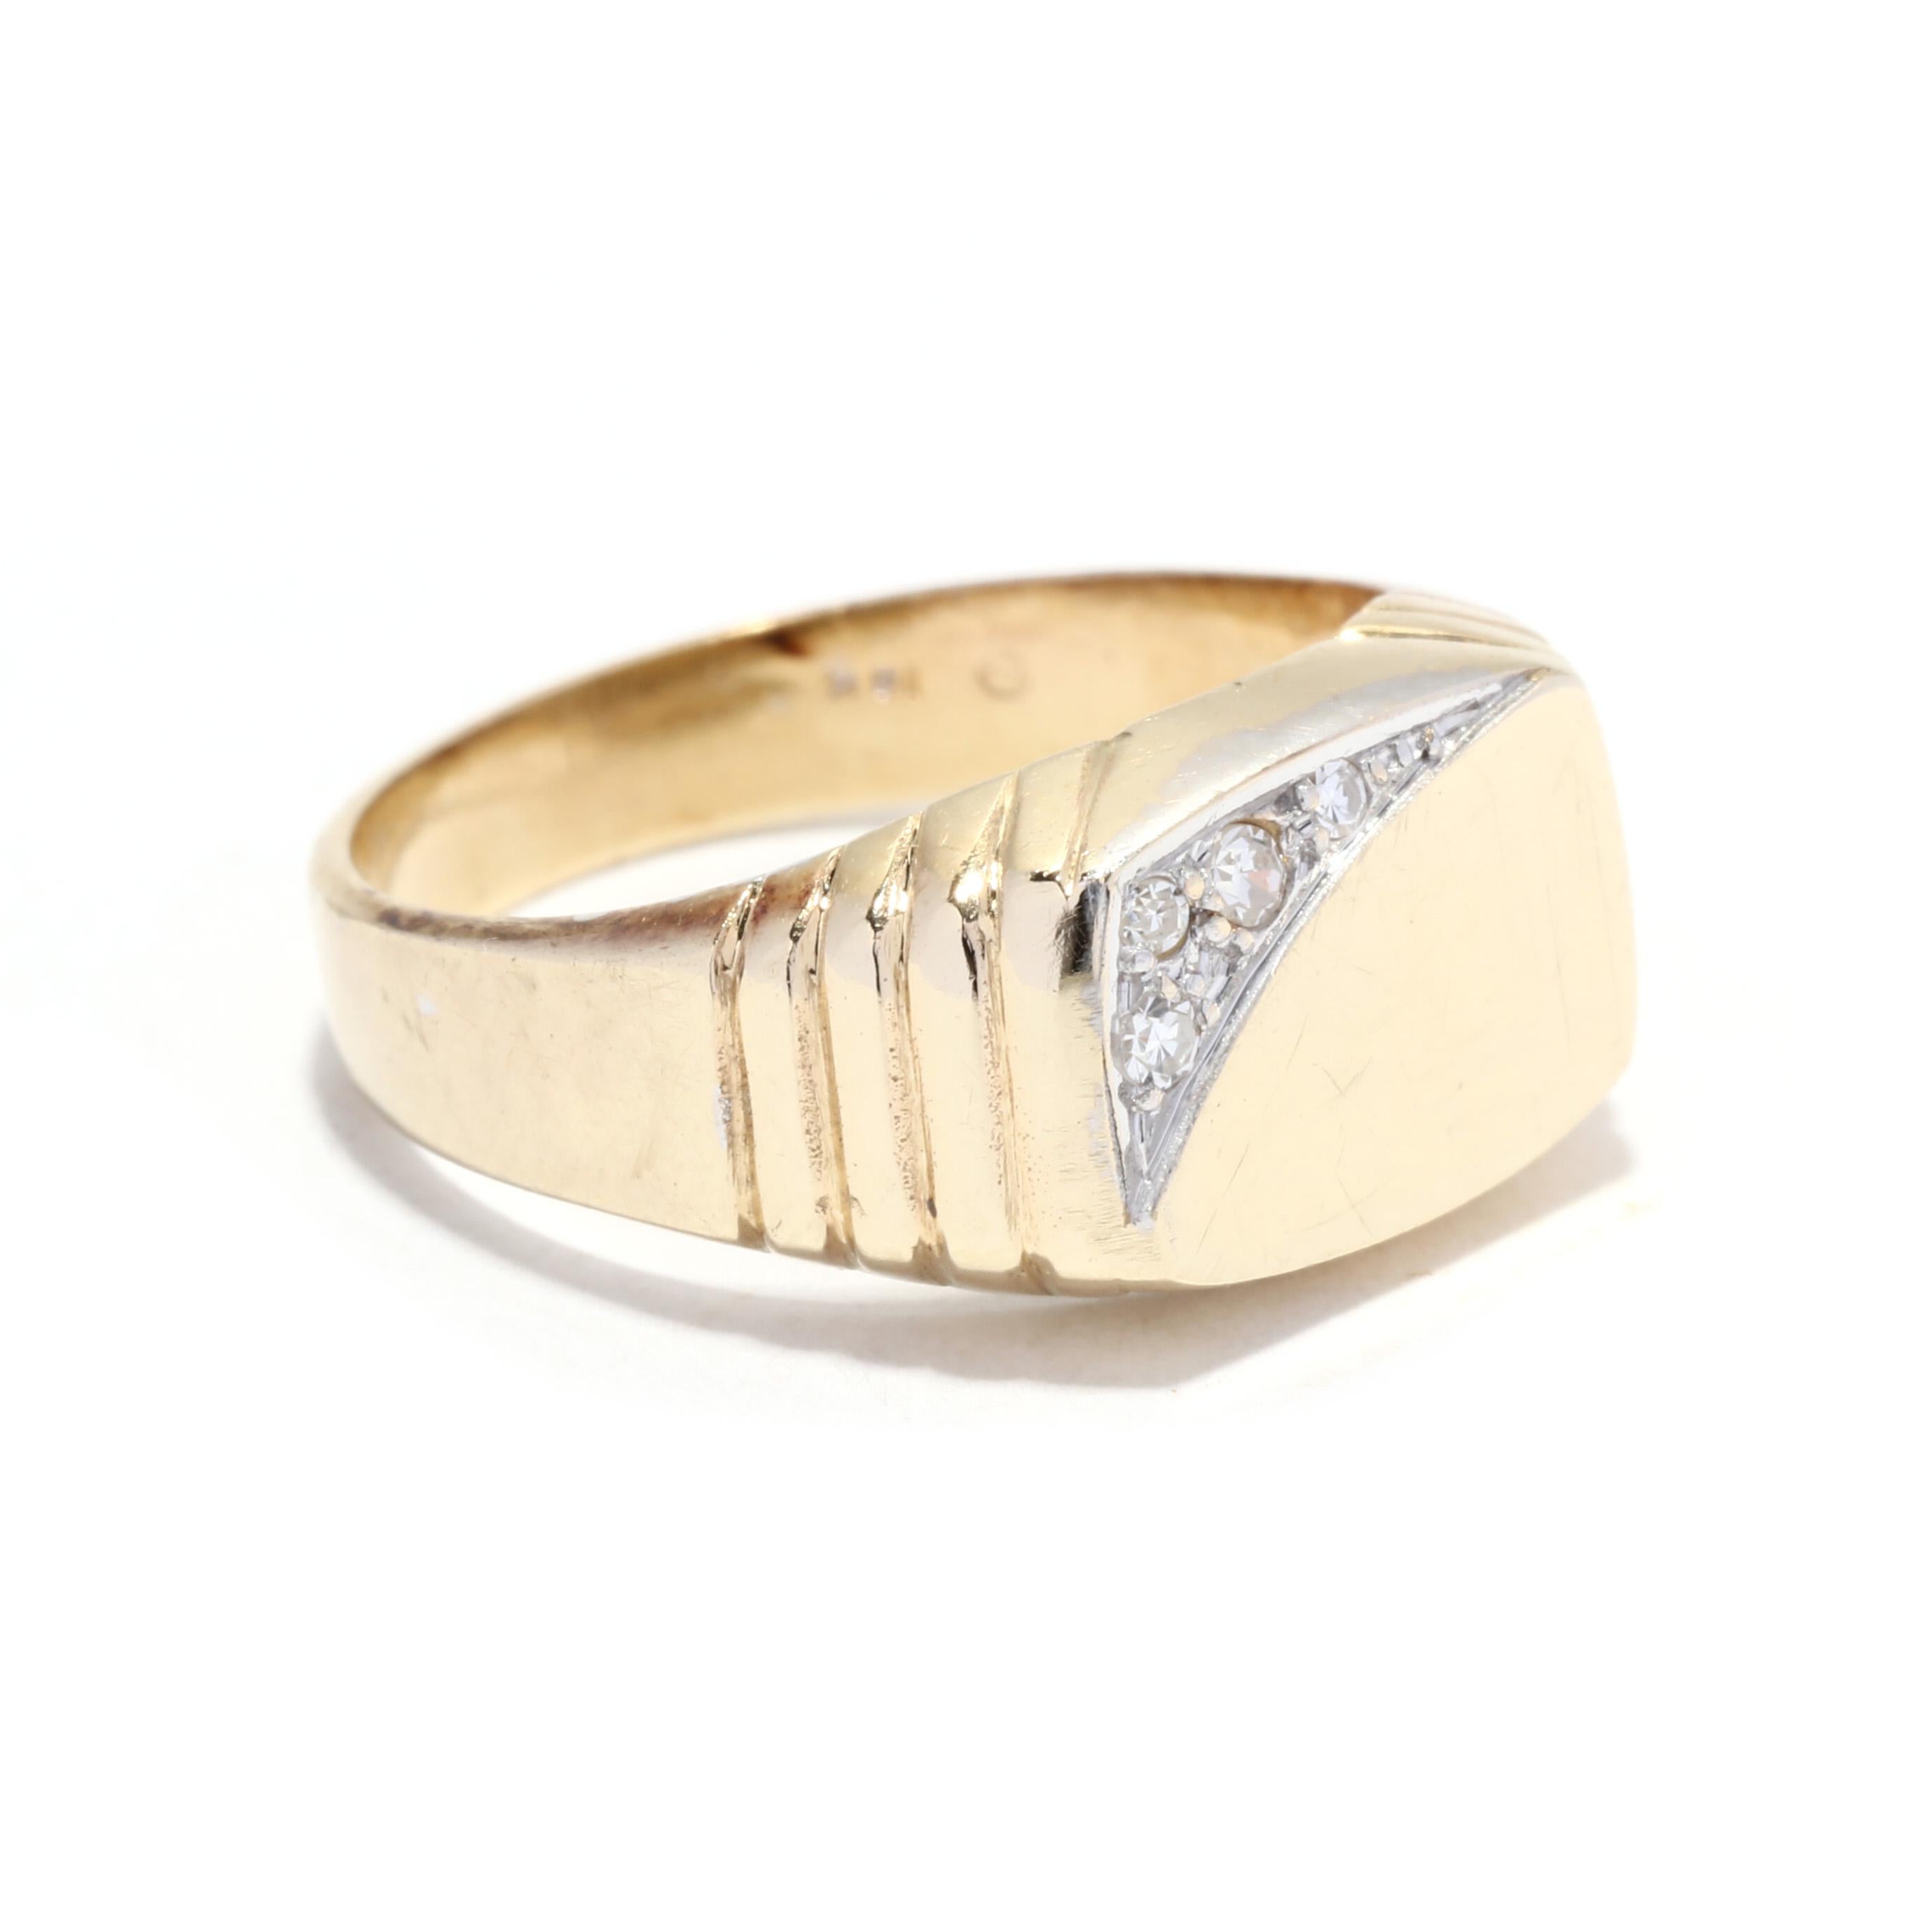 A vintage 14 karat yellow gold diamond rectangle signet ring. This vintage ring features a horizontal rectangle signet face with single cut round diamonds weighing approximately .05 total carats and with a tapered ridged band.

Stones:
- diamonds, 4